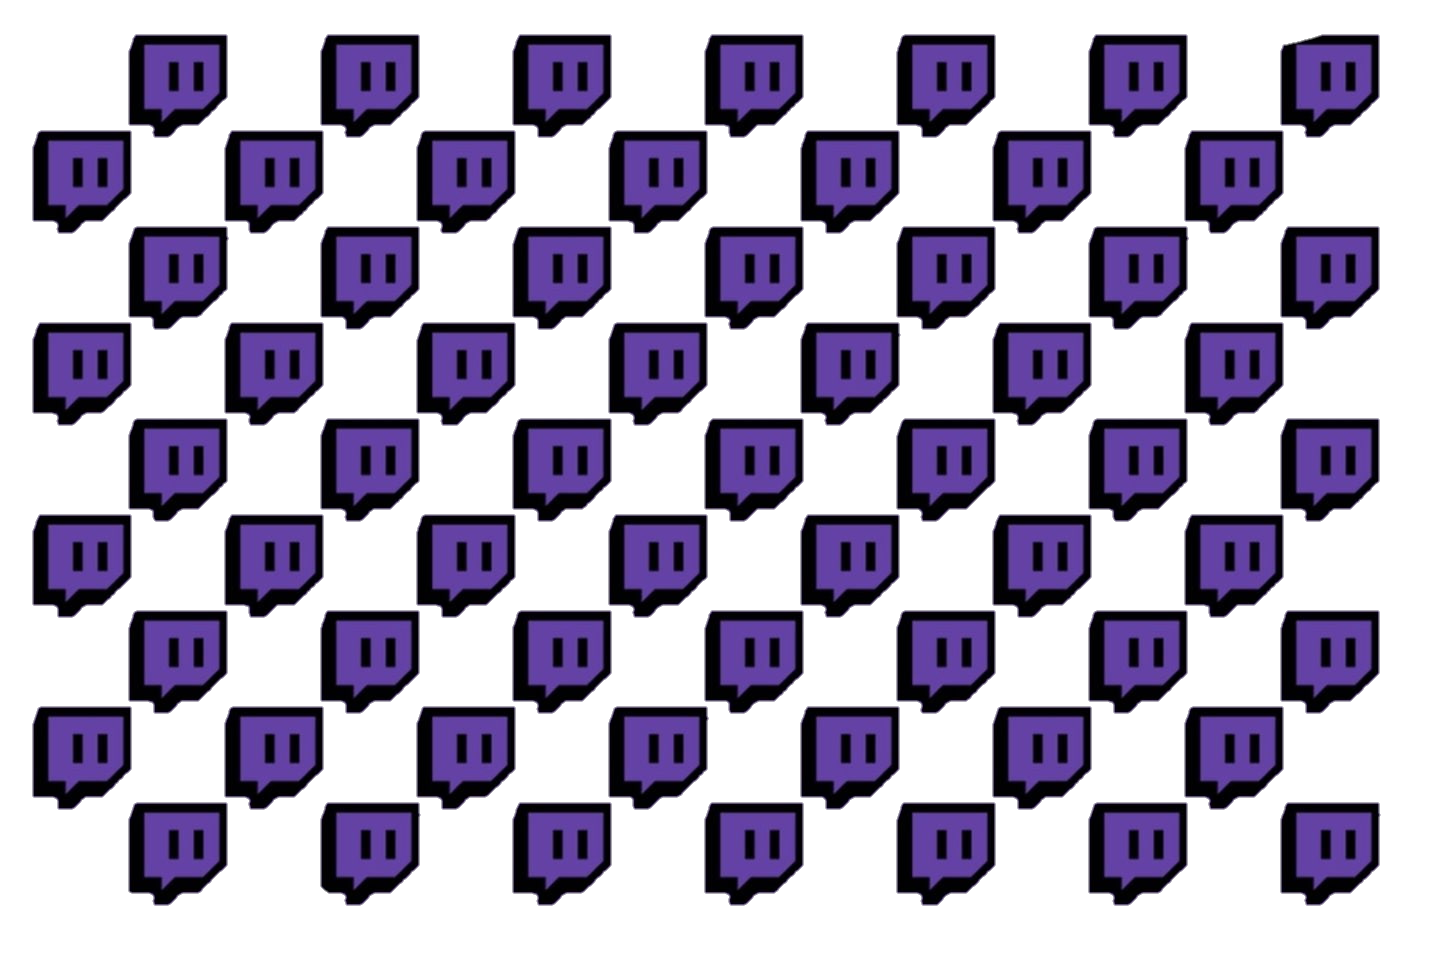 twitch-logo-png-from-pngfre-29